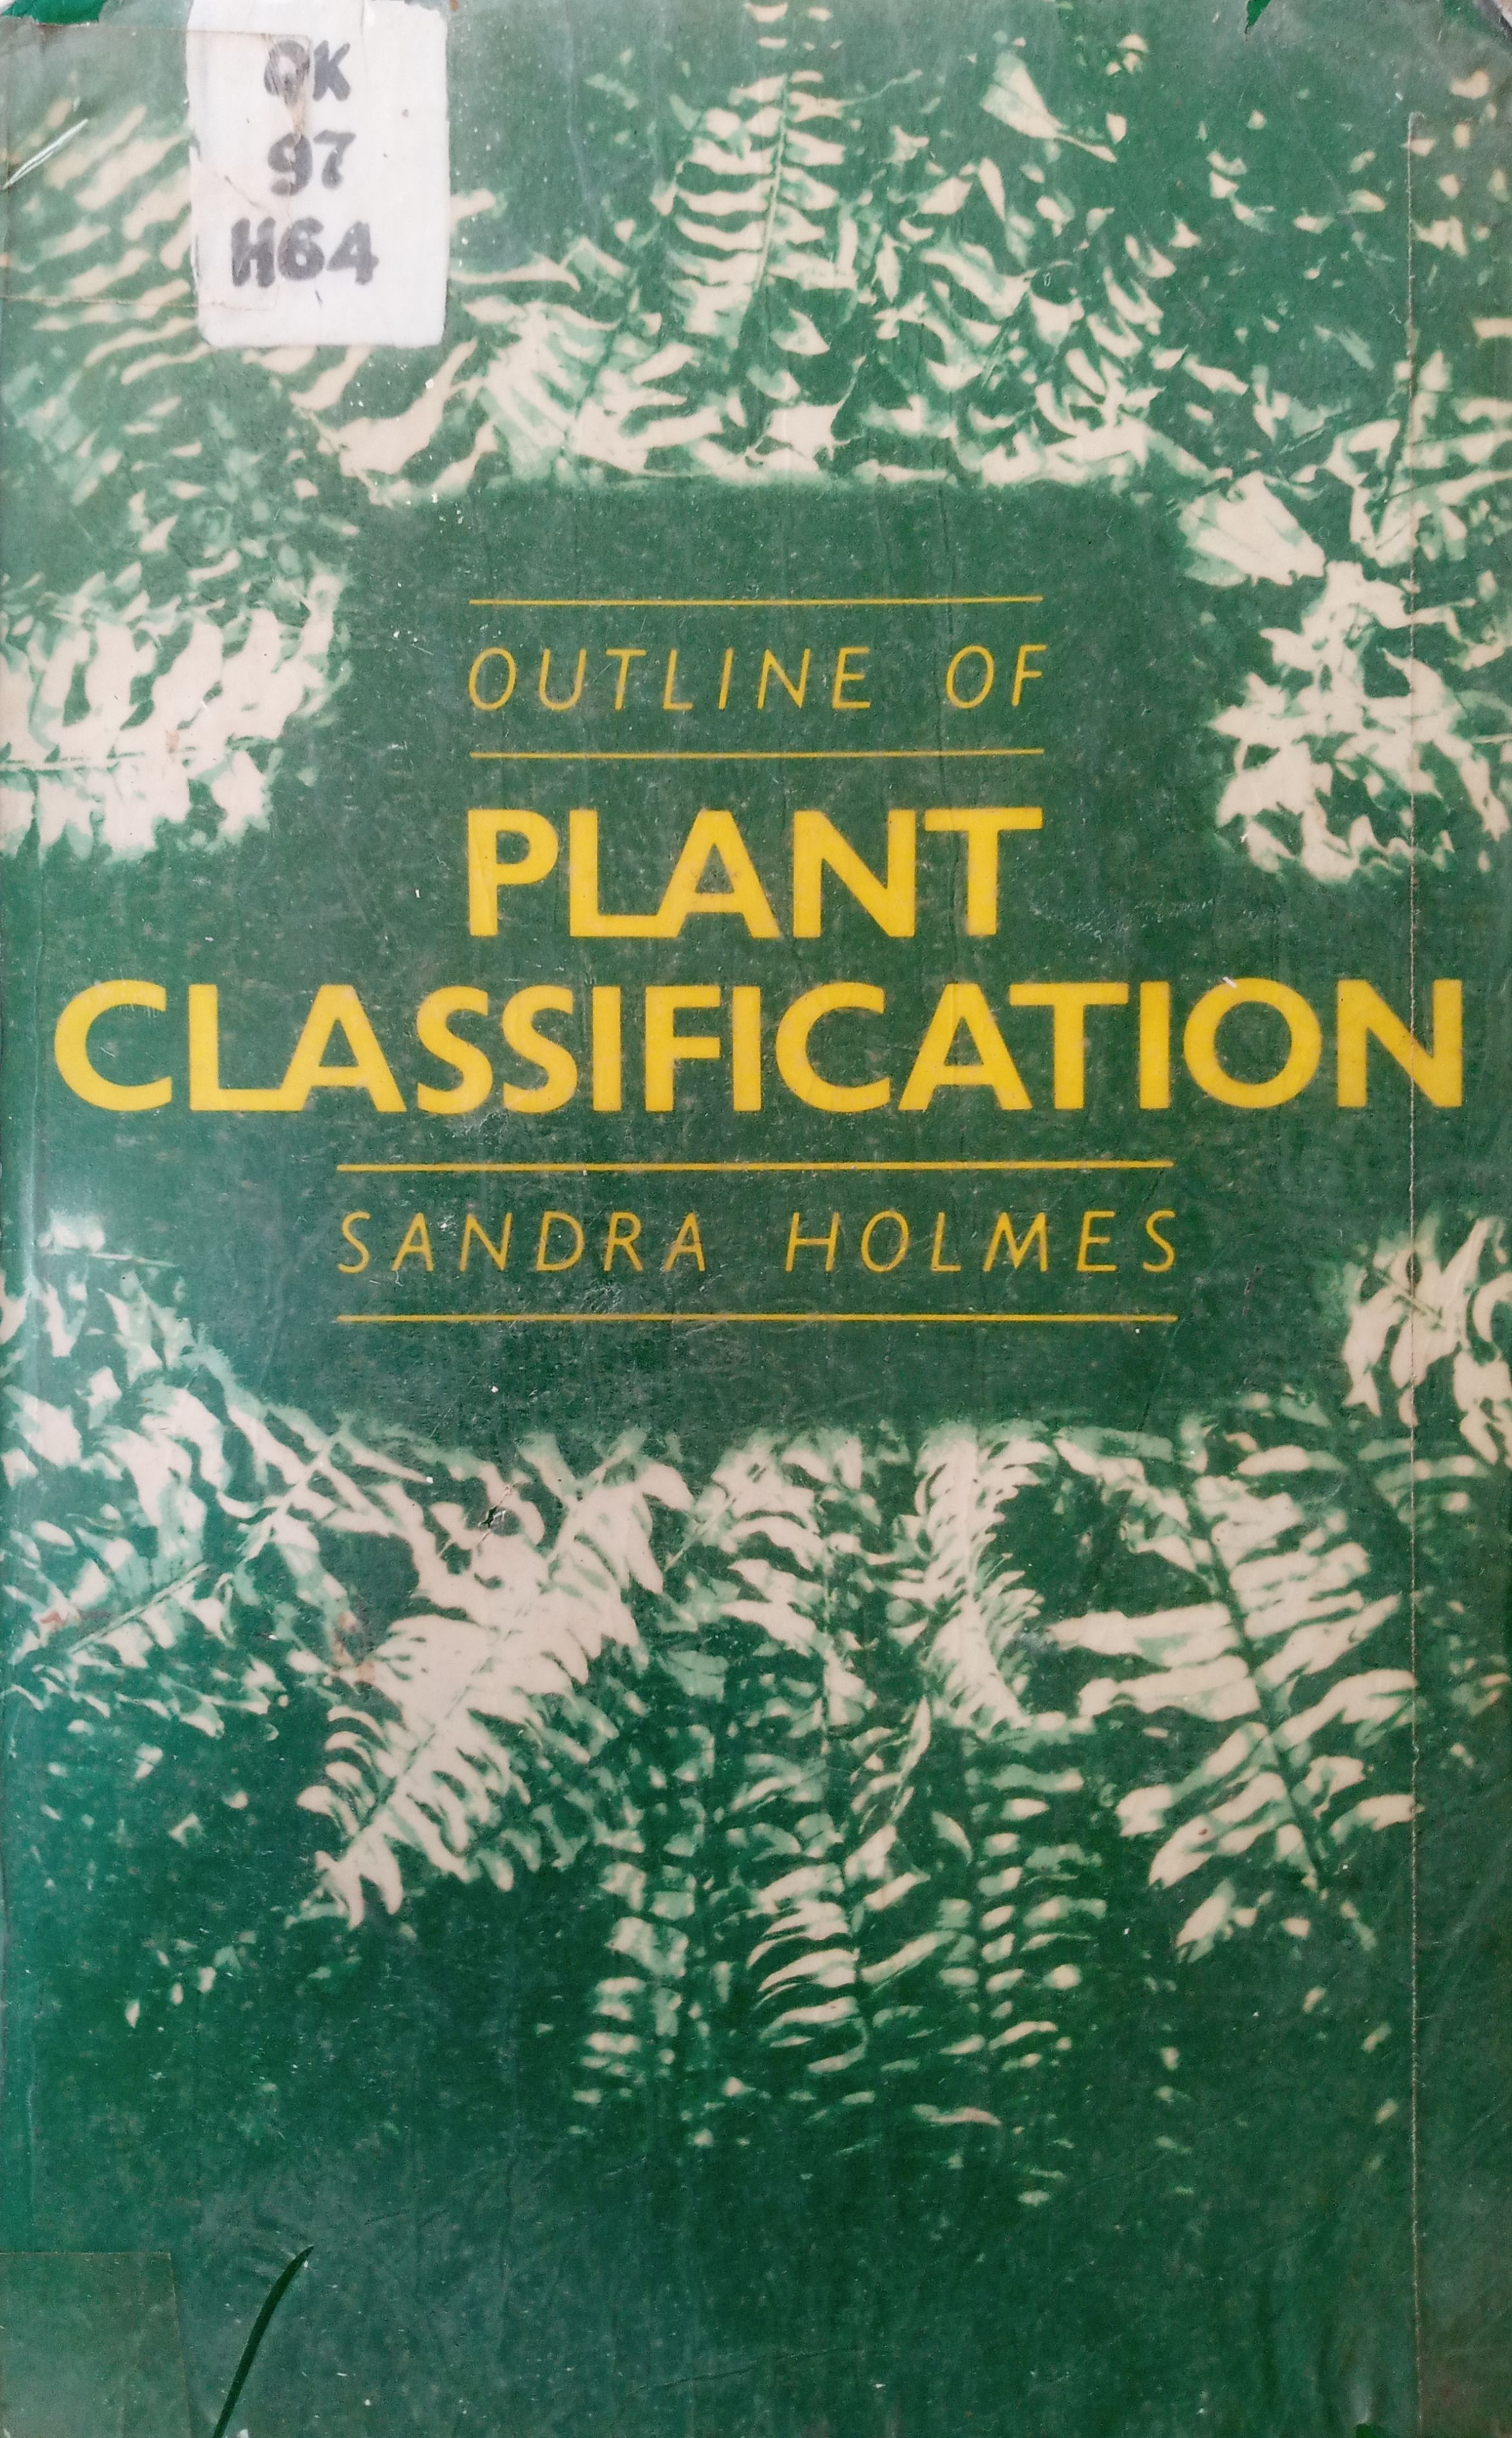 Outline of plant classification.